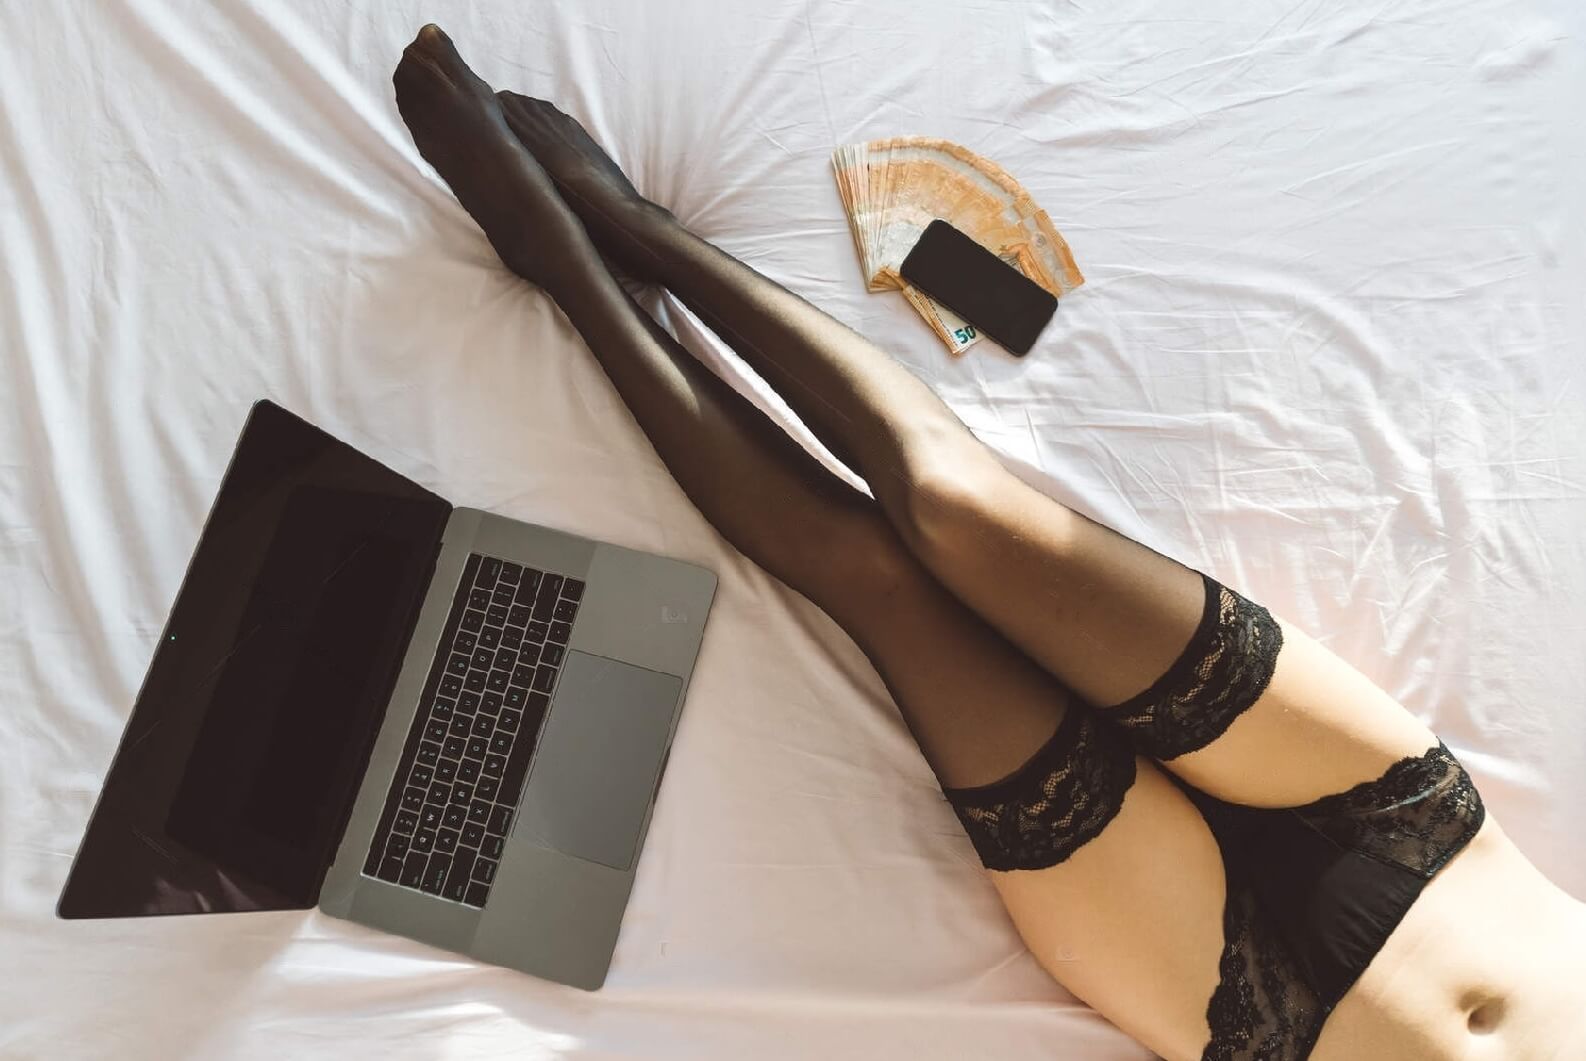 girl in best used stockings with laptop and money